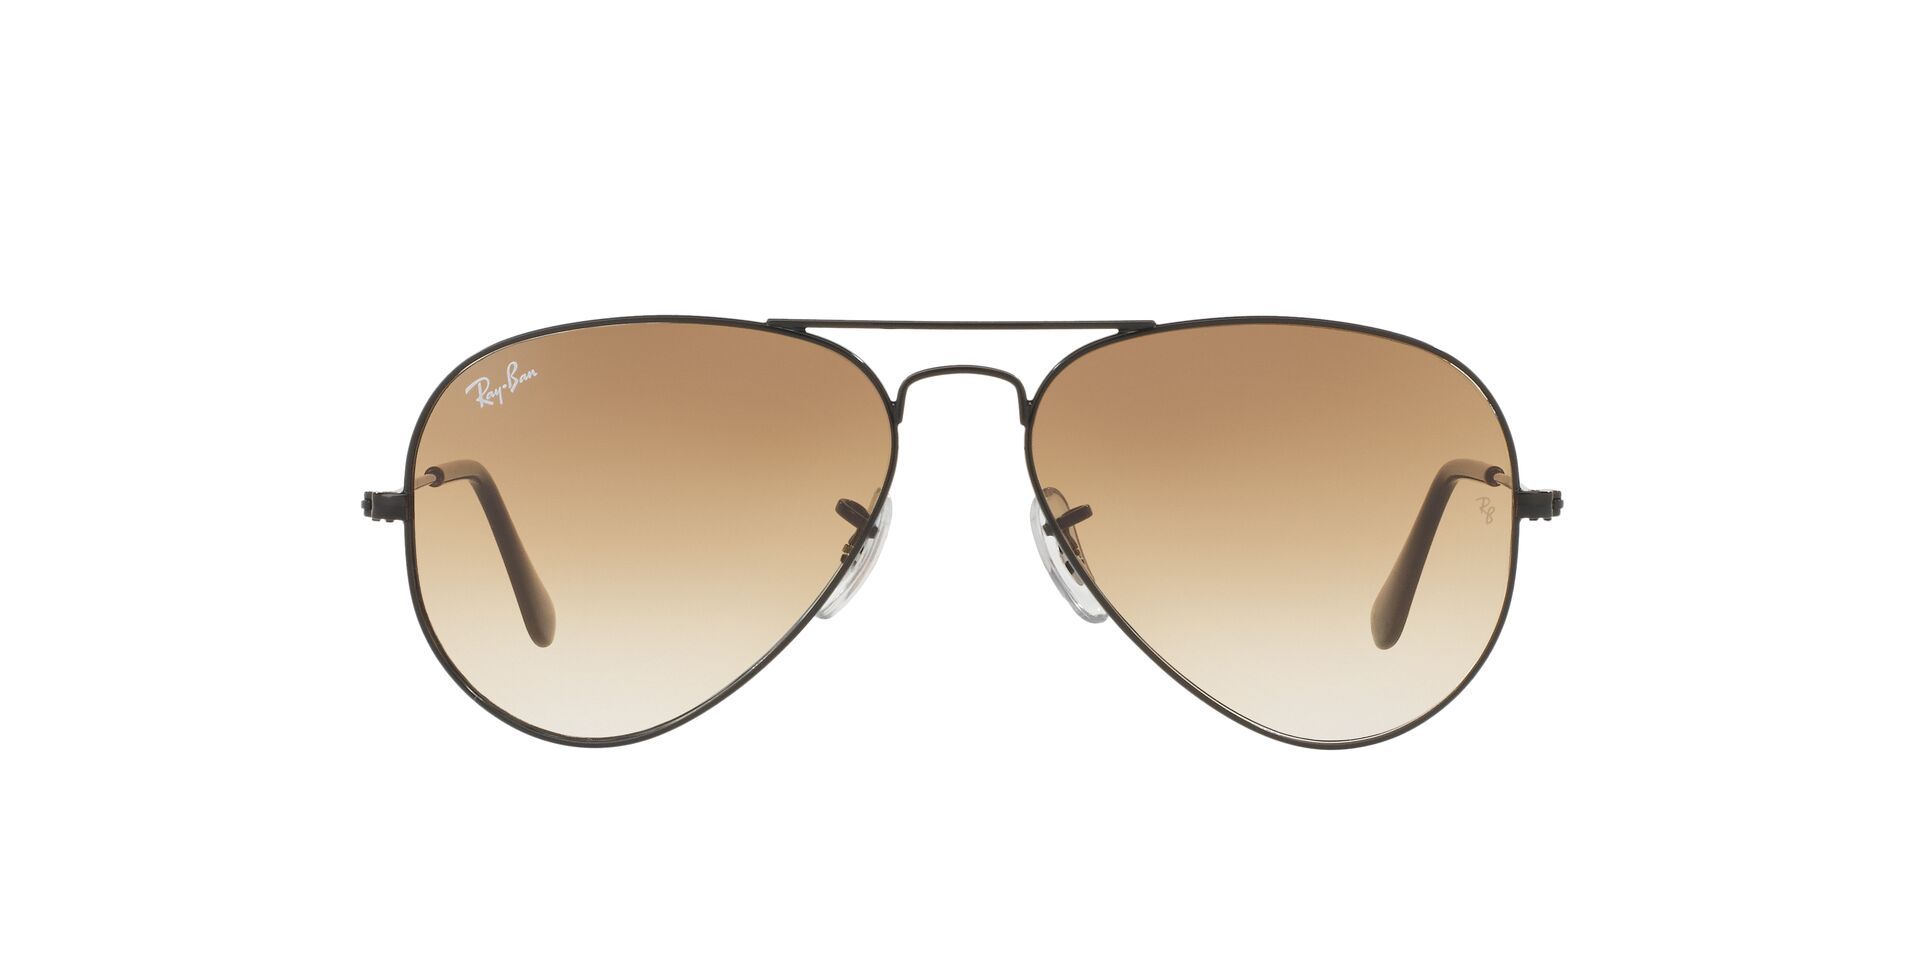 Ray-Ban 0RB3025I Polar Brown Gradient Icons Aviator (58 mm): Buy Ray-Ban  0RB3025I Polar Brown Gradient Icons Aviator (58 mm) Online at Best Price in  India | Nykaa